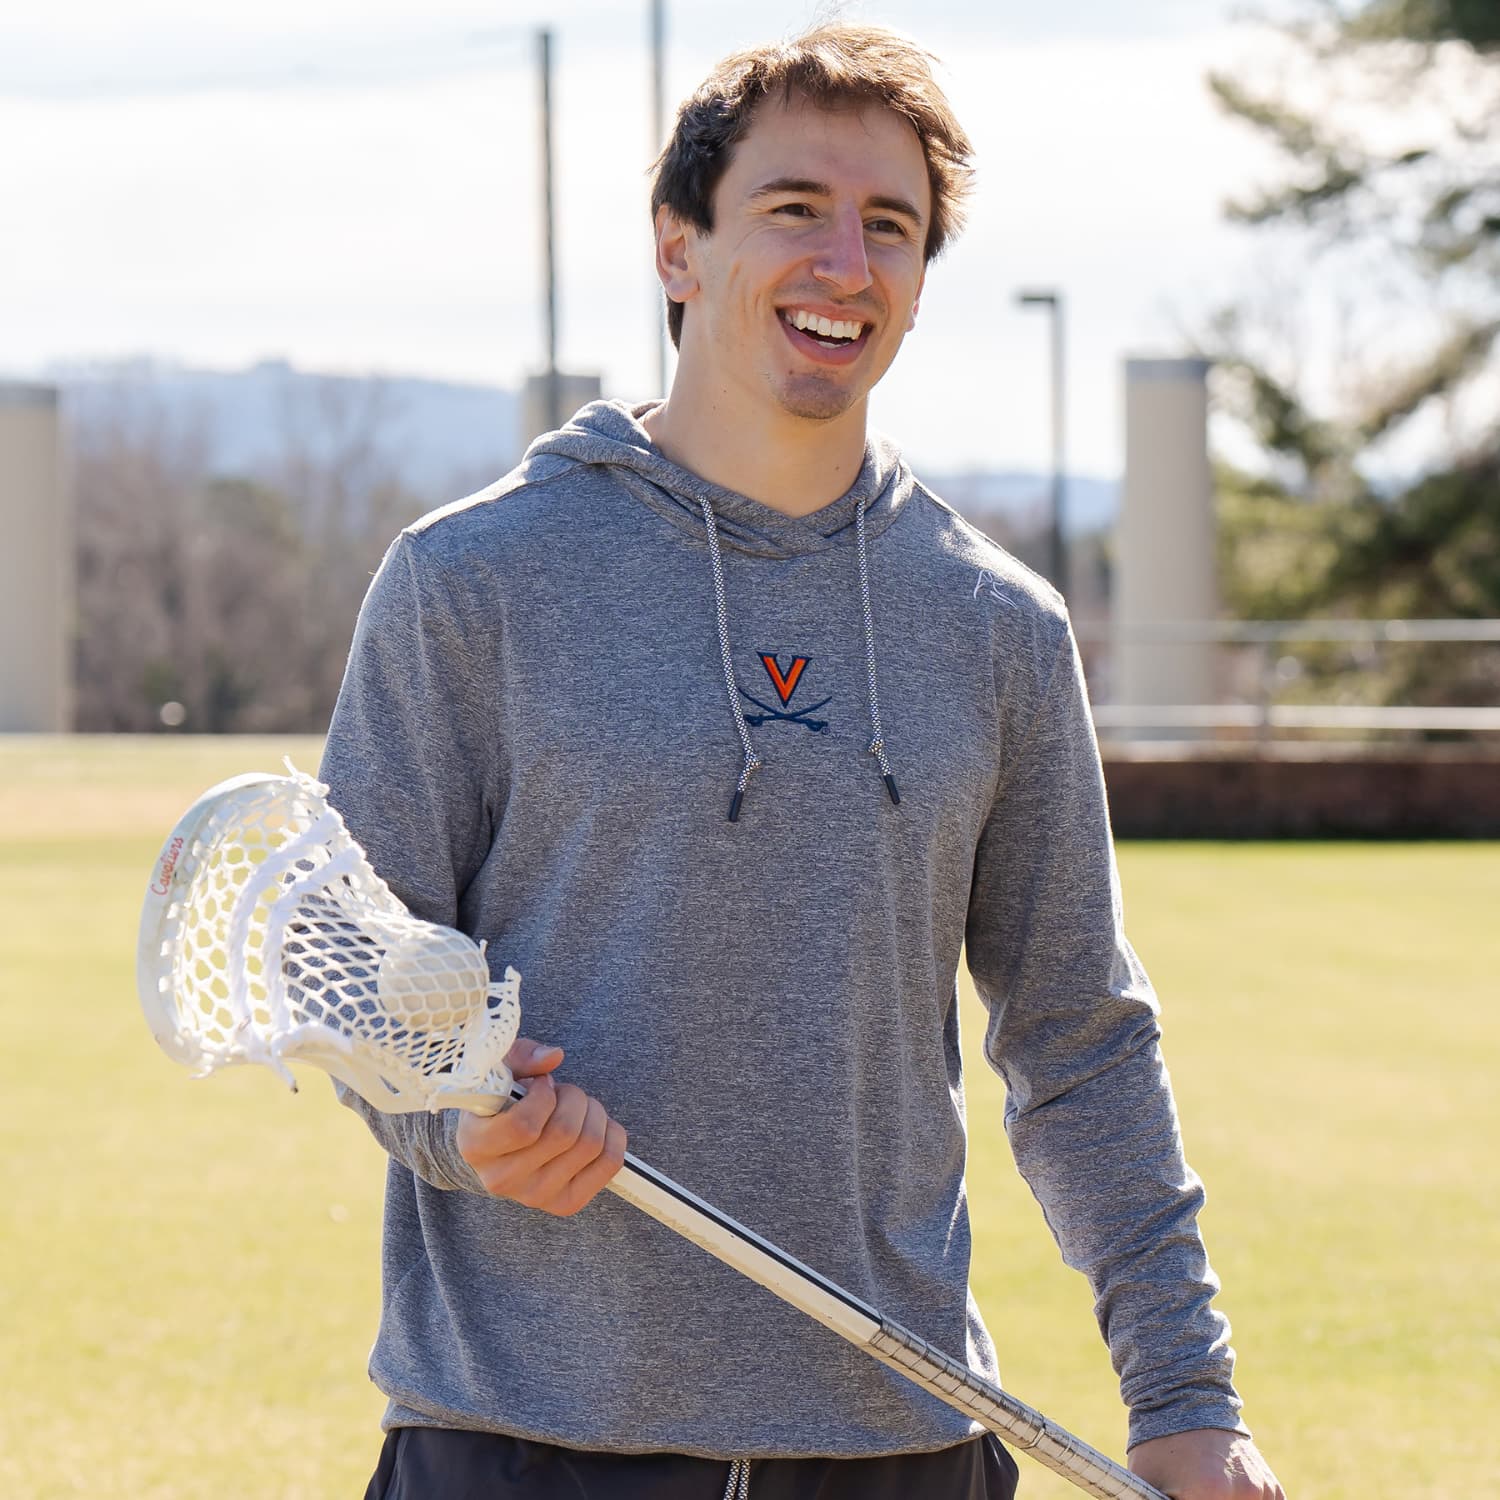 Connor Shellenberger holding a lacrosse stick wearing The Lawn Hoodie